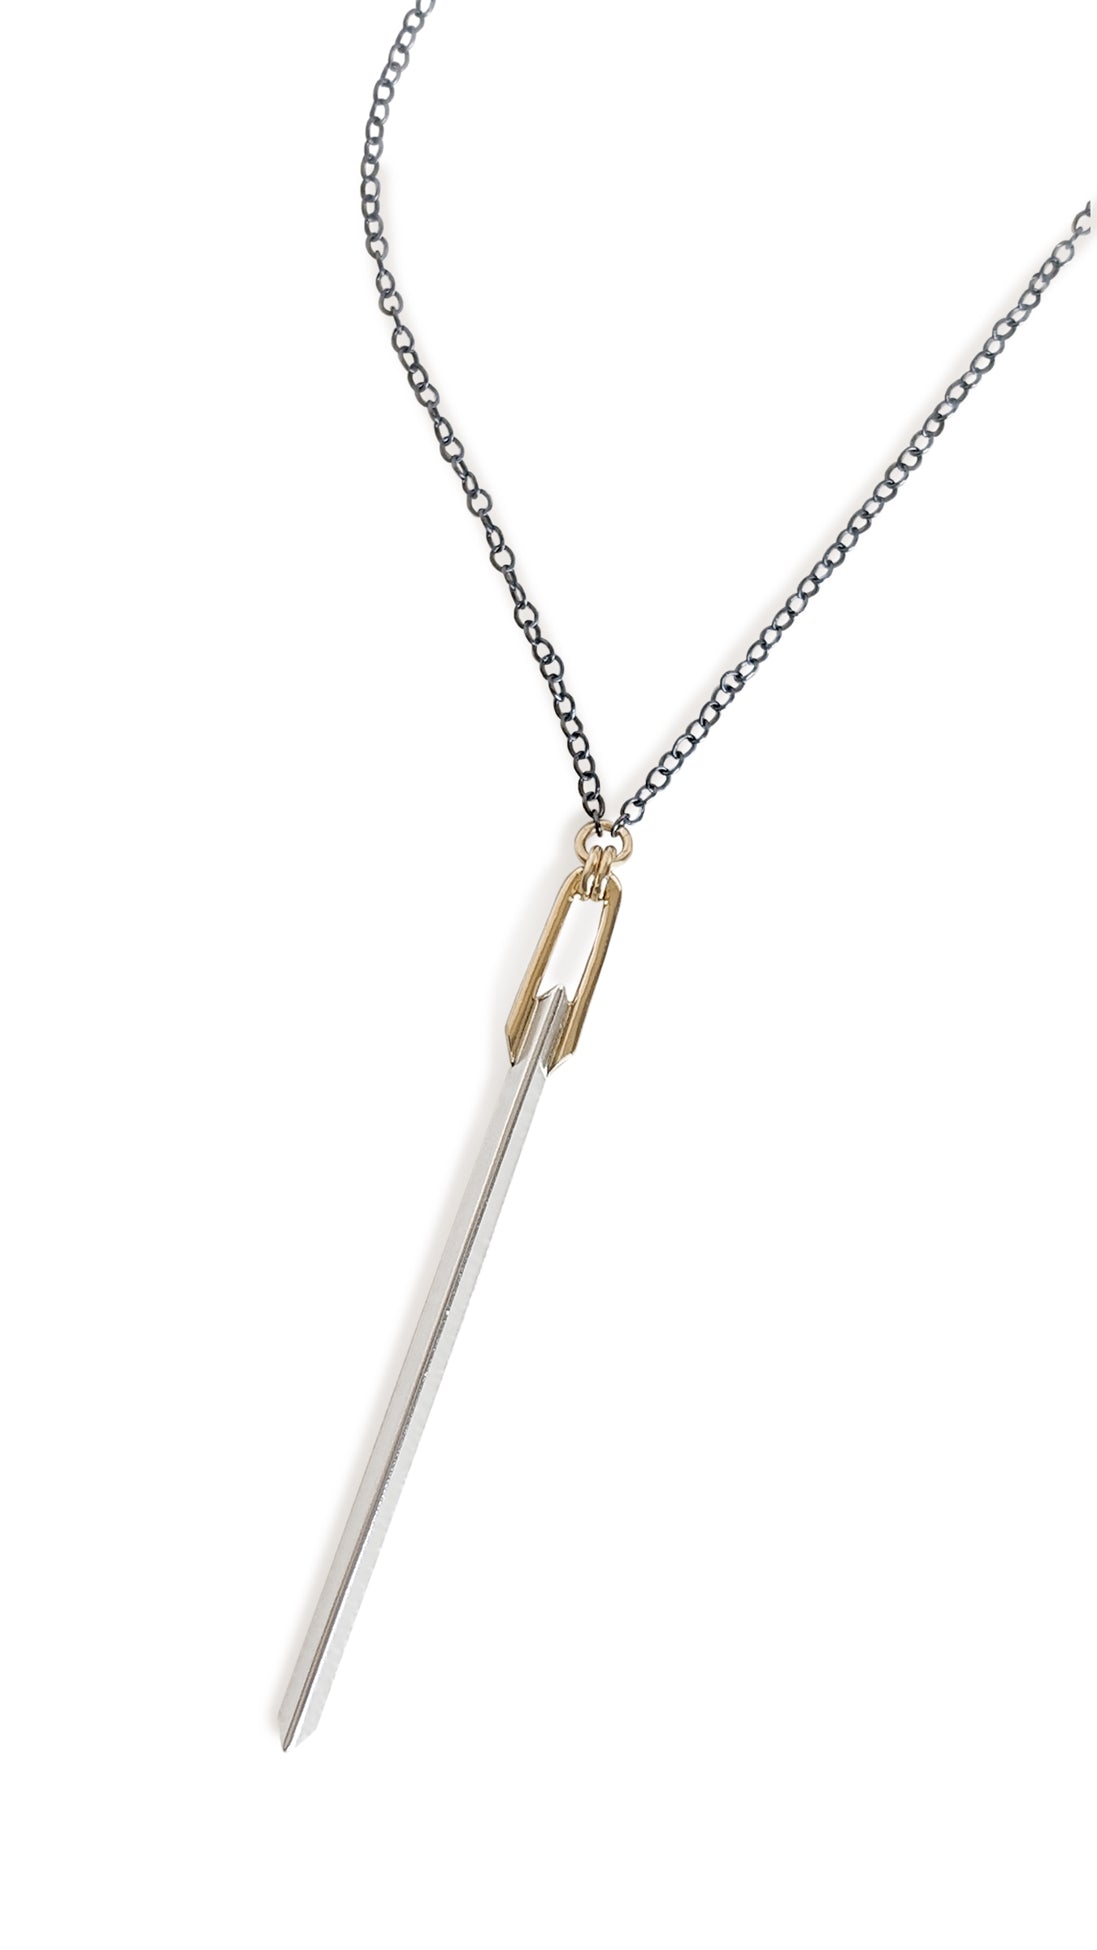 black, silver and gold bar pendant necklace